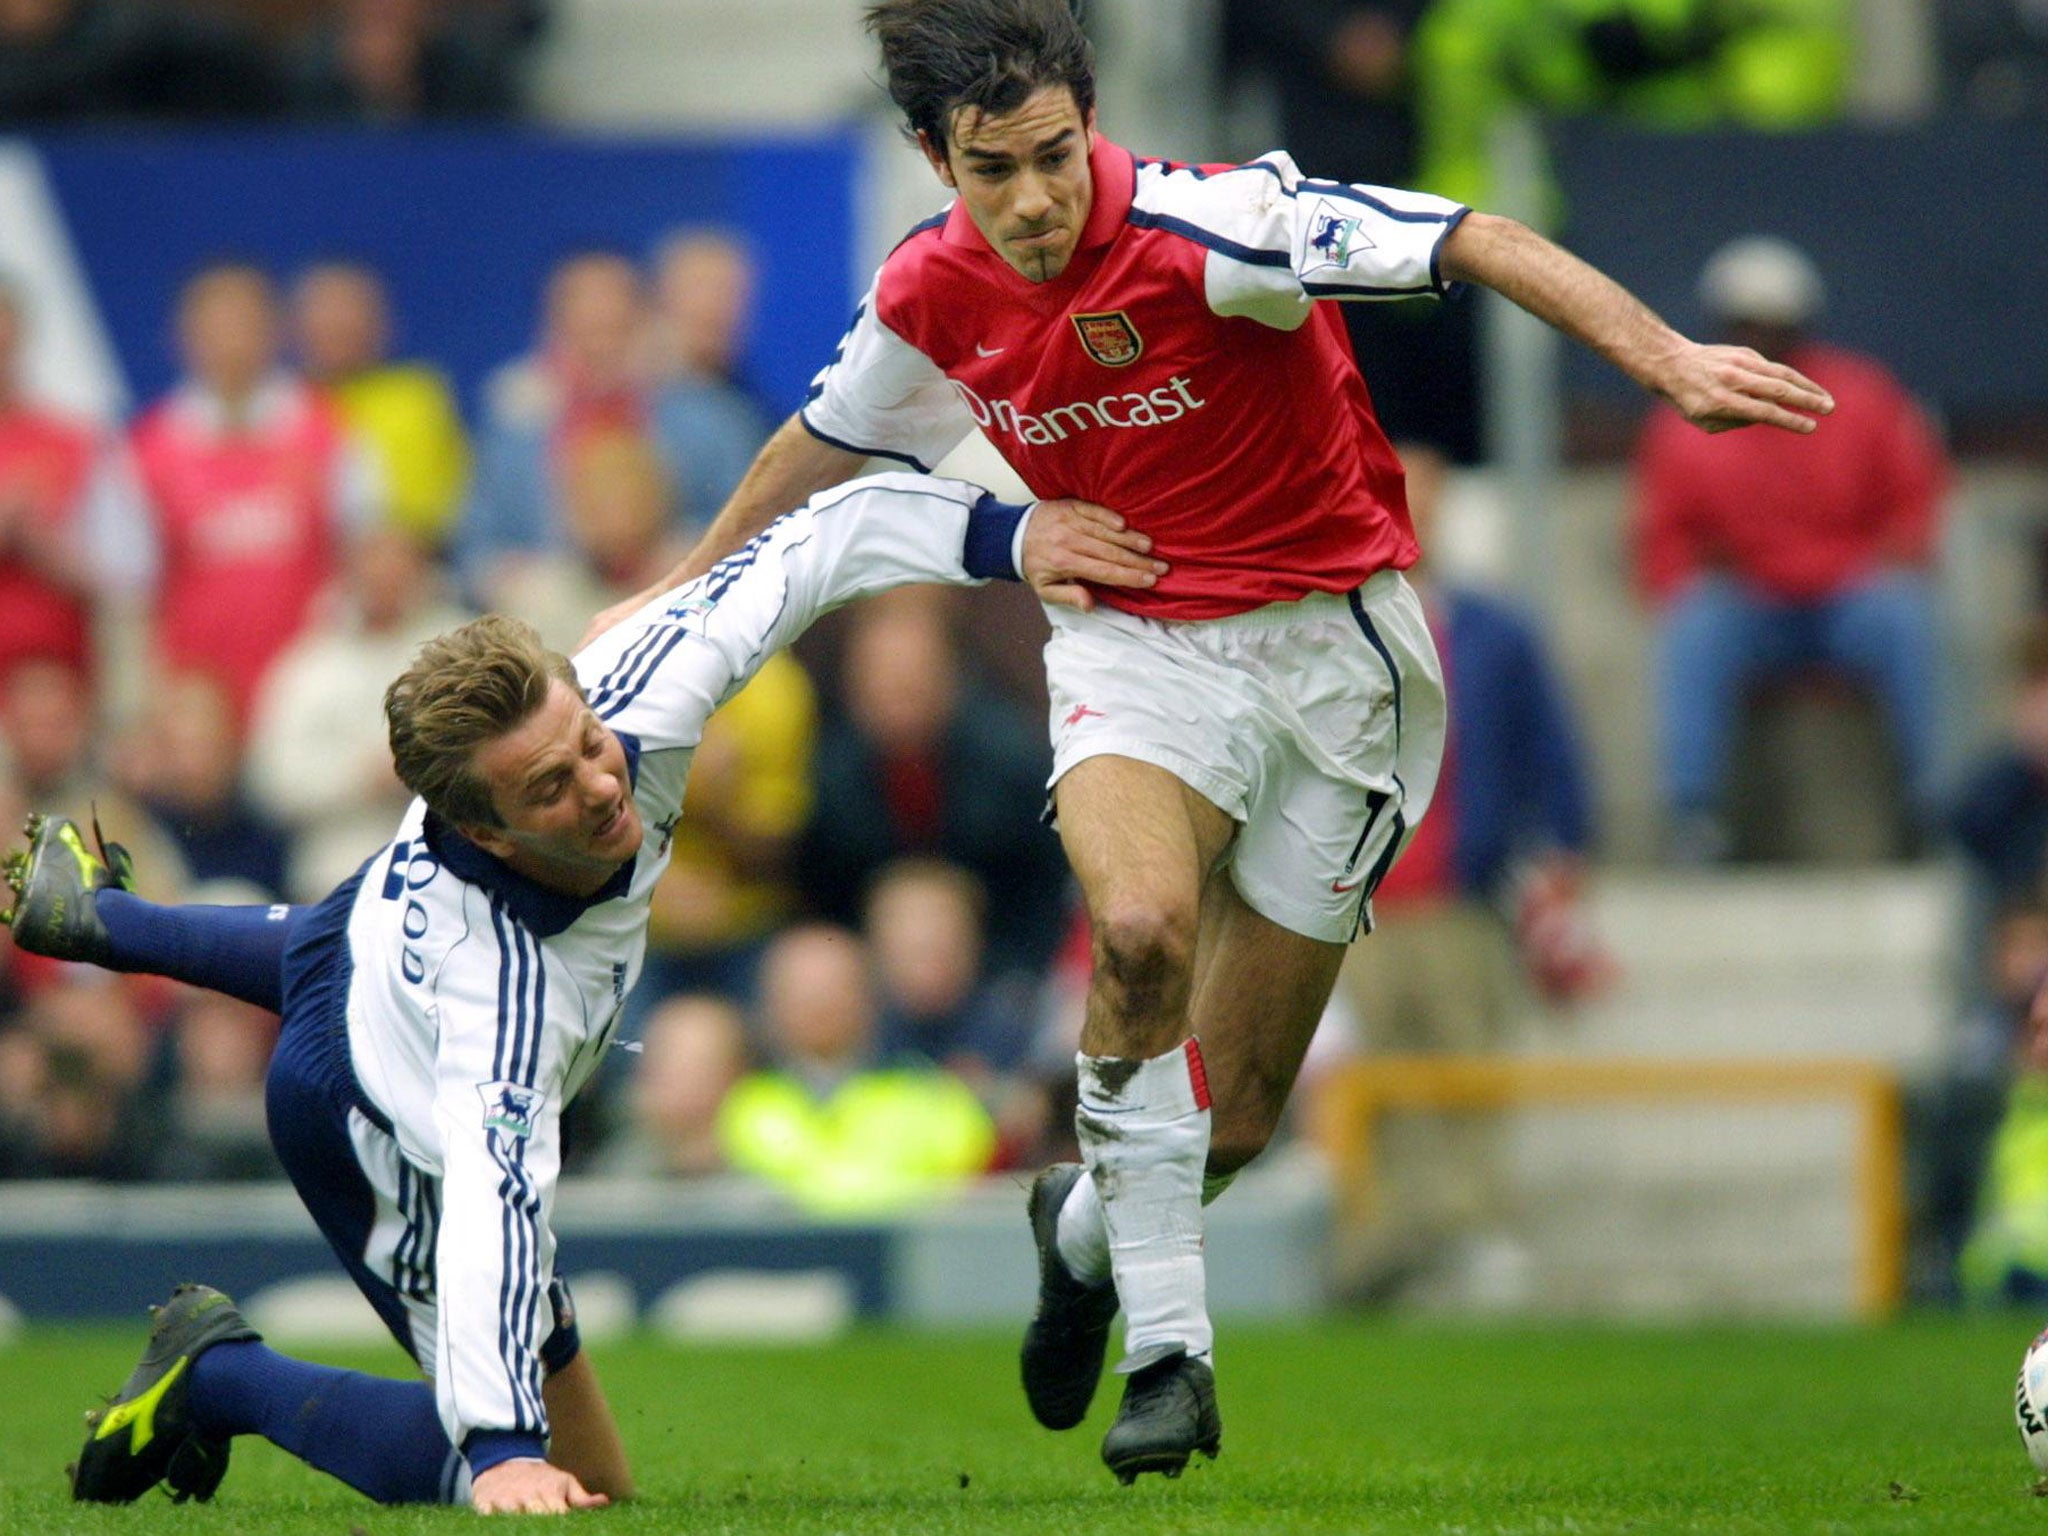 Arsenal's Frenchman Robert Pires (right) shrugs off Tottenham's Tim Sherwood during the FA Cup semi-final at Old Trafford in April 2001